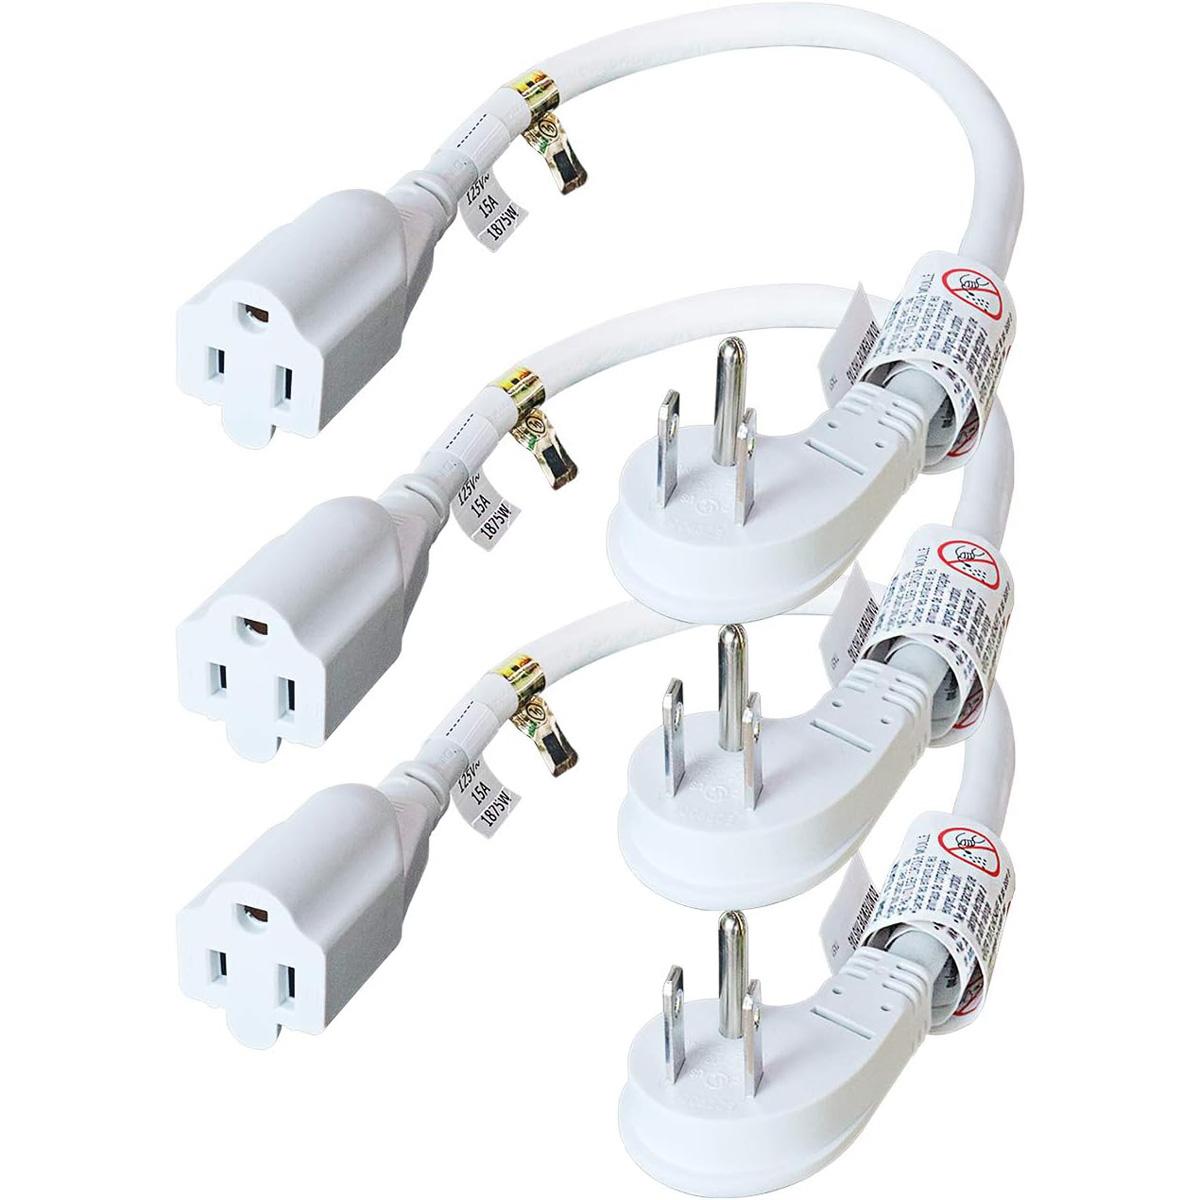 Firmerst 1875W Flat Plug 1Ft Extension Cord 3 Pack for $7.99